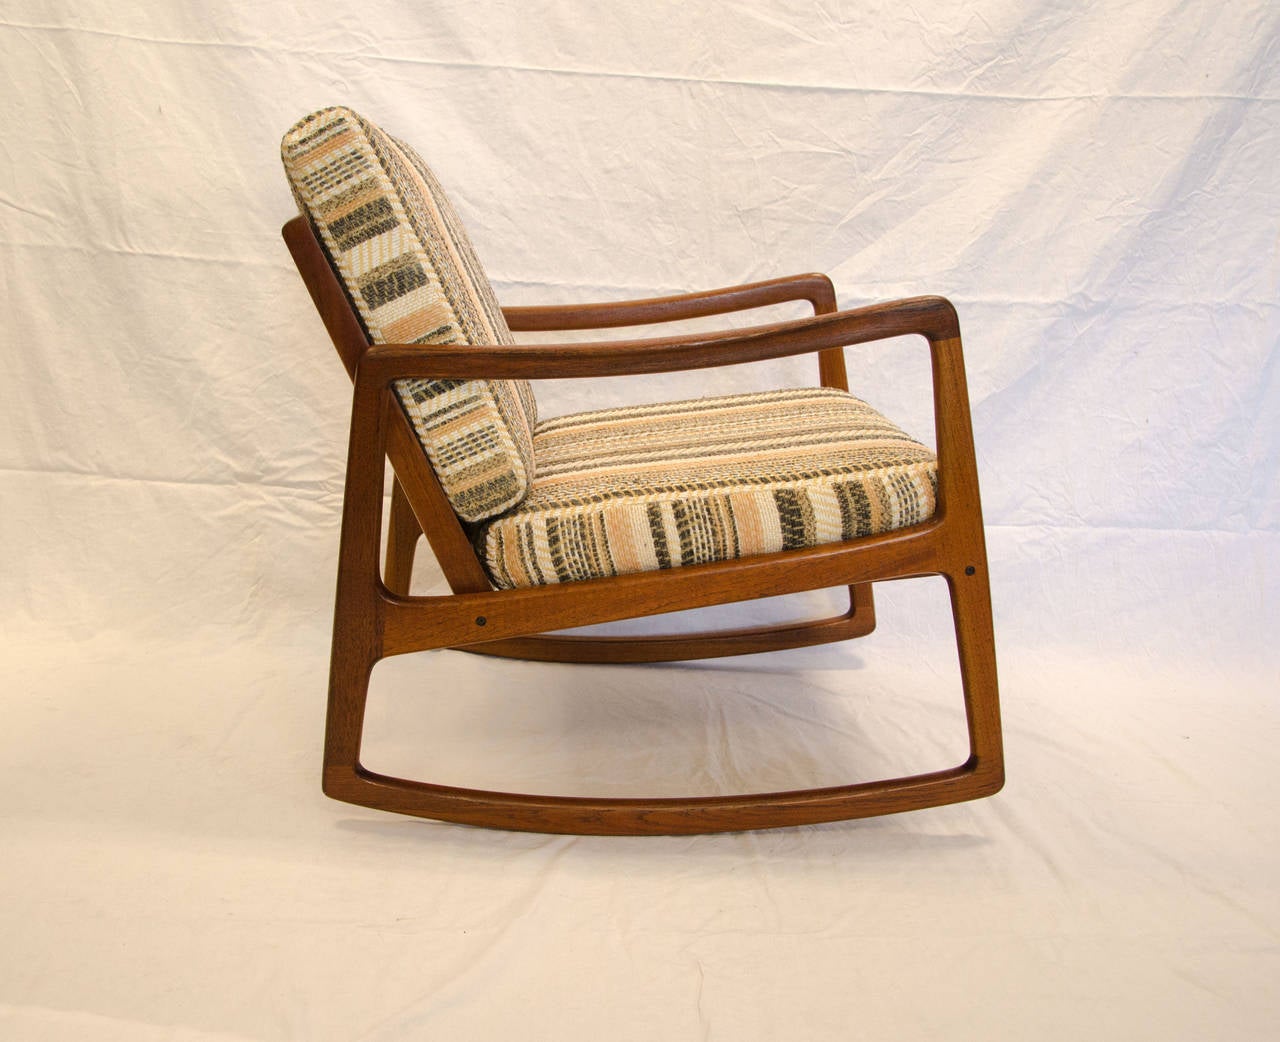 Nice rocking chair designed by Ole Wanscher for France & Sons and imported by John Stuart N.Y. Both circular tags are intact and attached to the frame behind the cushion.